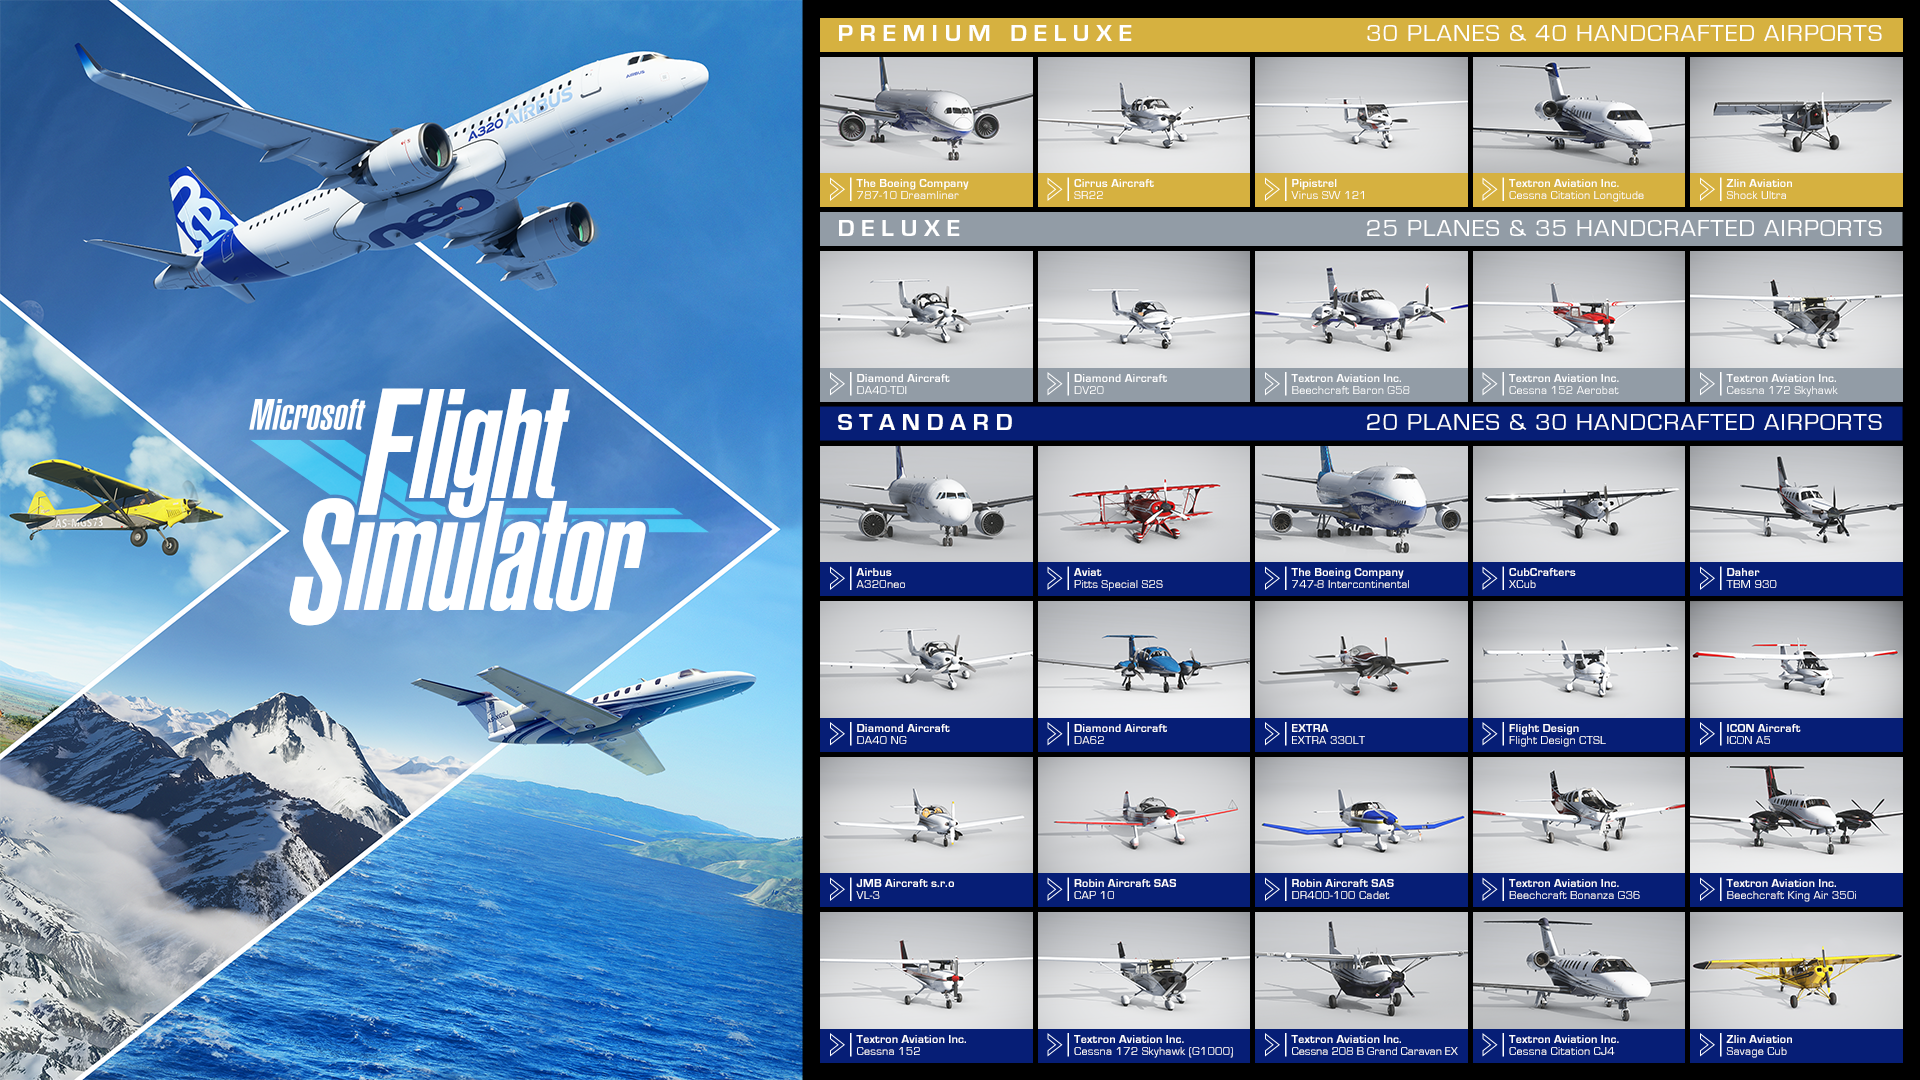 Microsoft Flight Simulator will launch on August 18th on PC - The